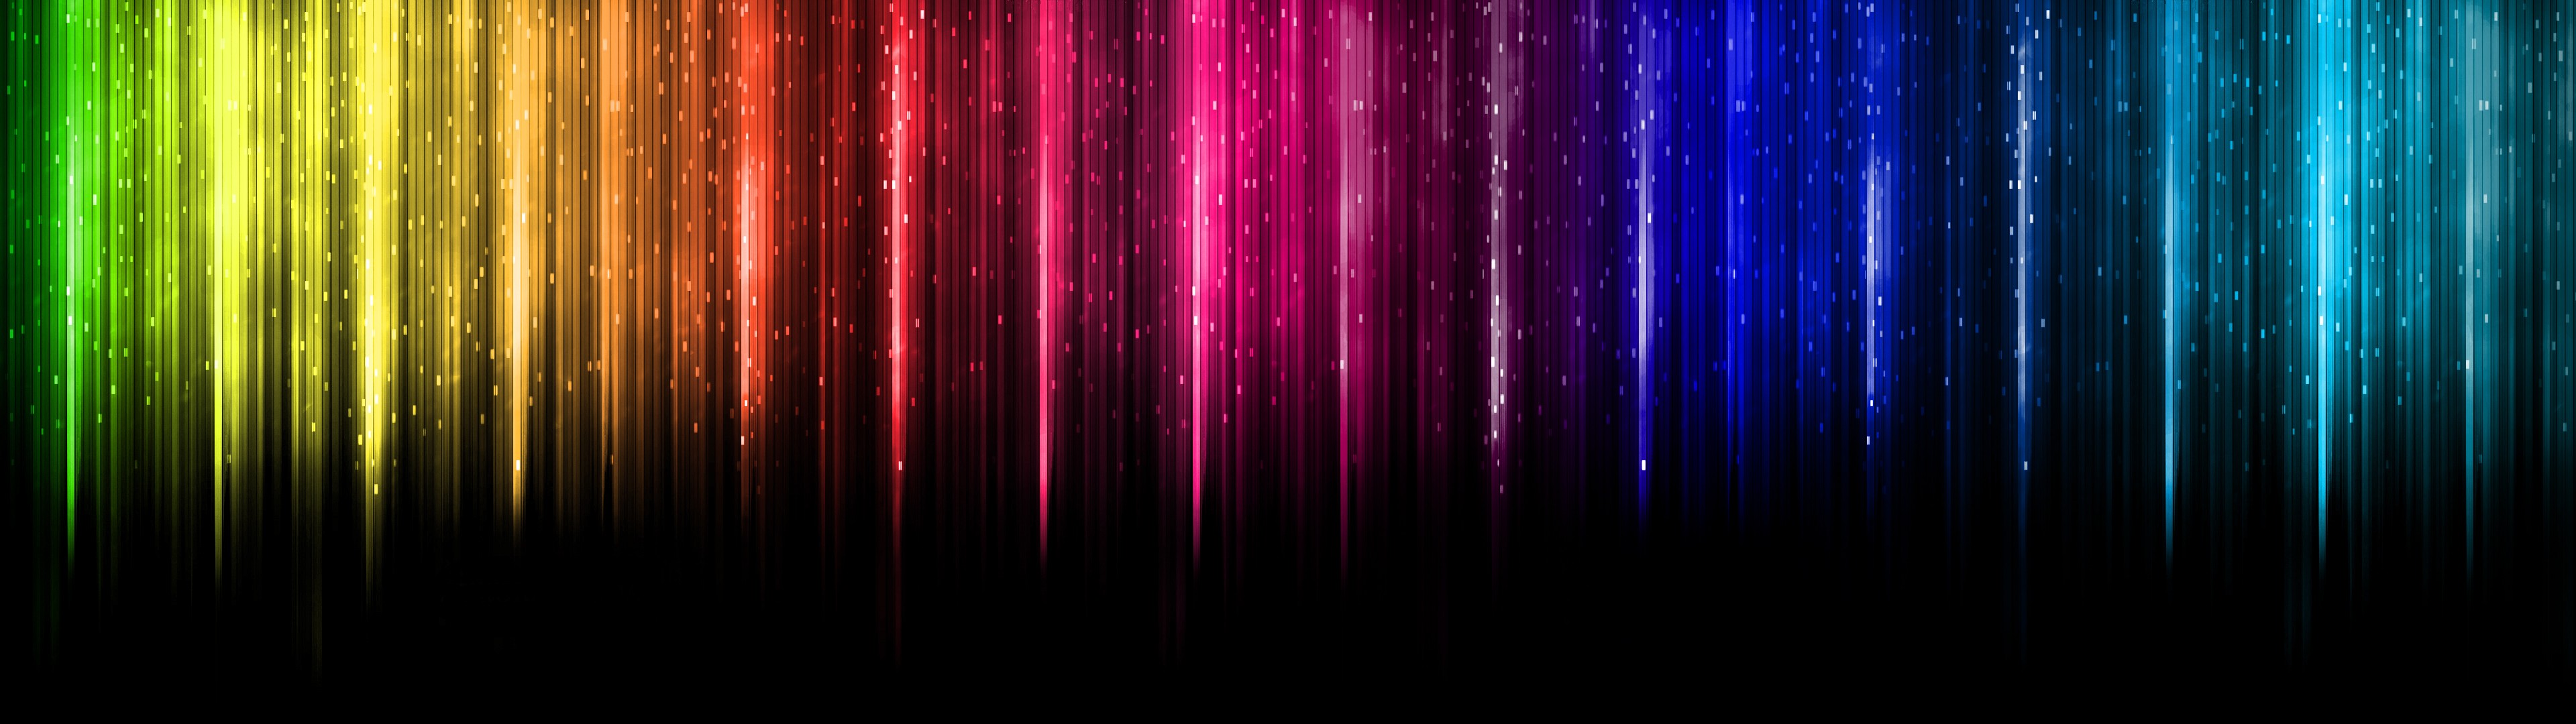 Free Download 3840x1080 96 3840x1080 For Your Desktop Mobile